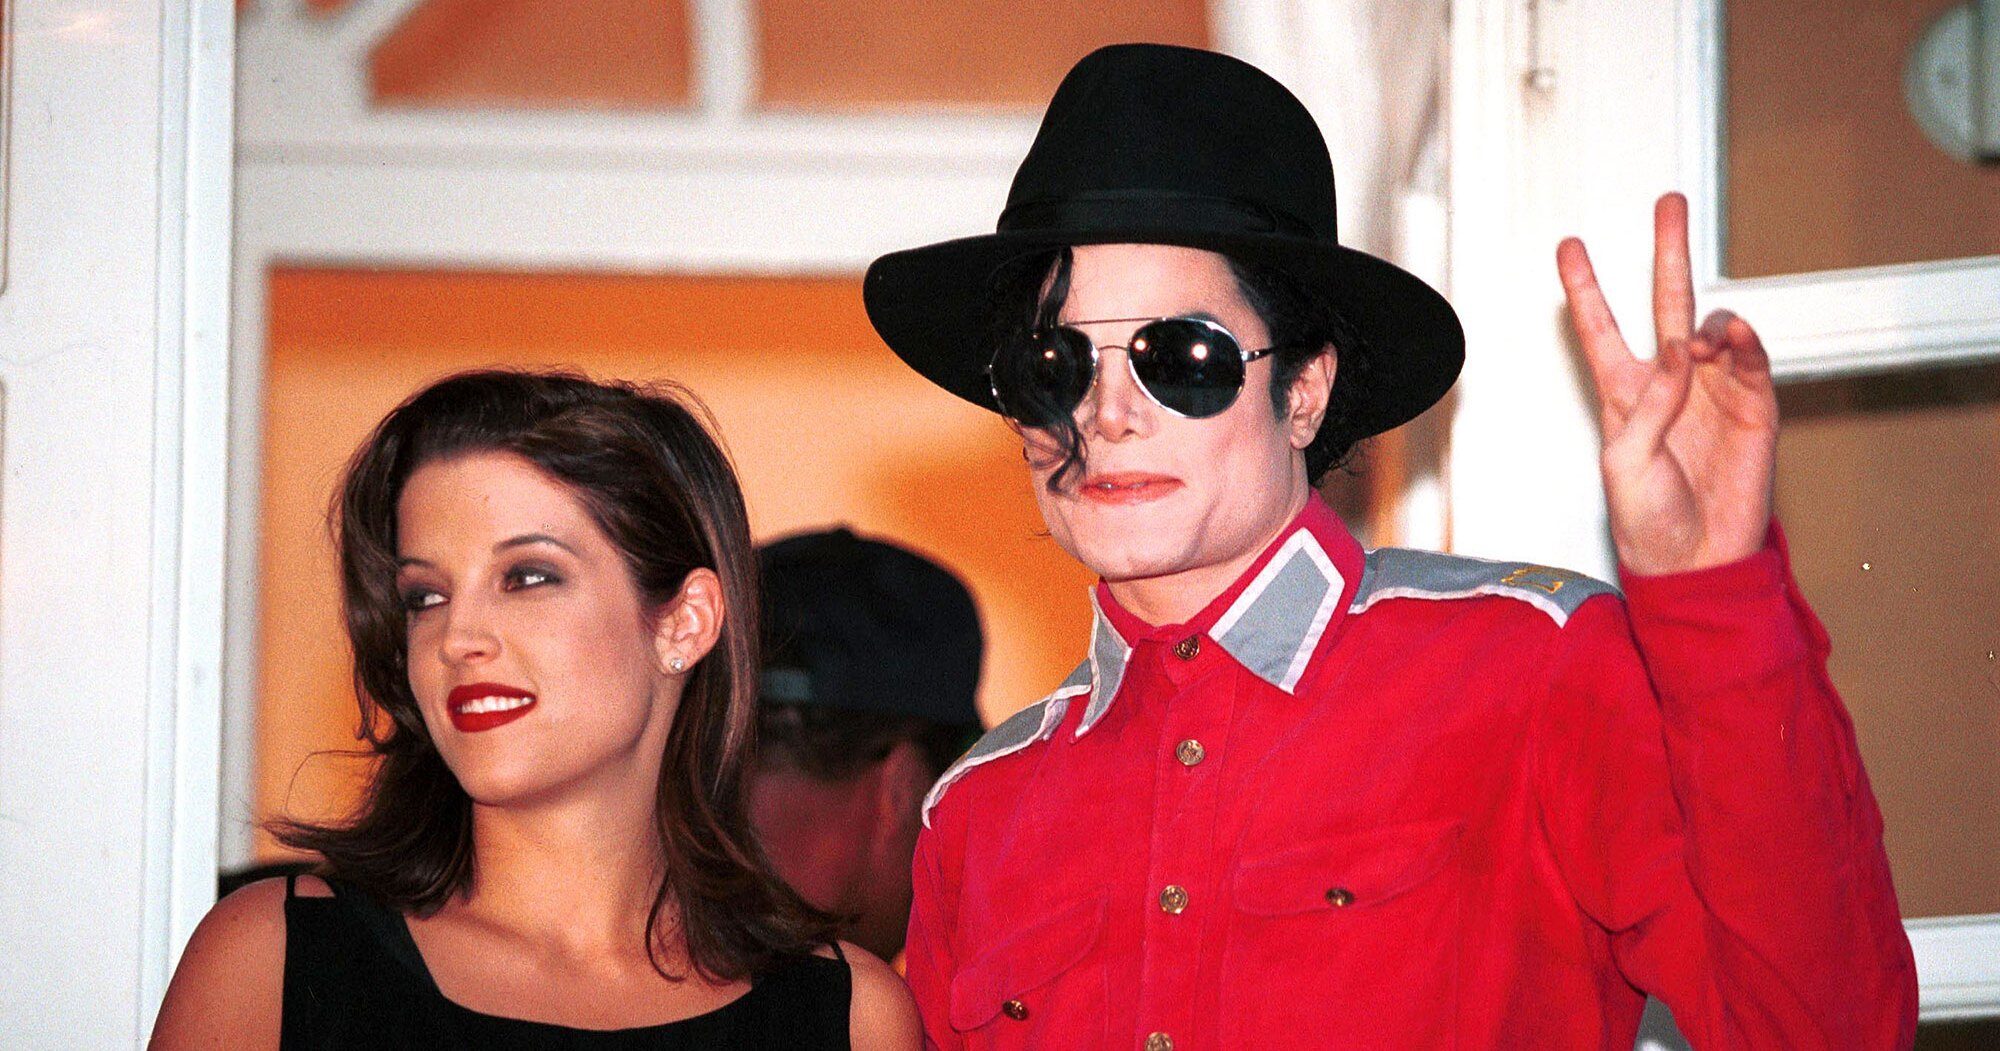 january-1996-divorce-michael-jackson-and-lisa-marie-presley-a-timeline-of-their-brief-marriage-8988964